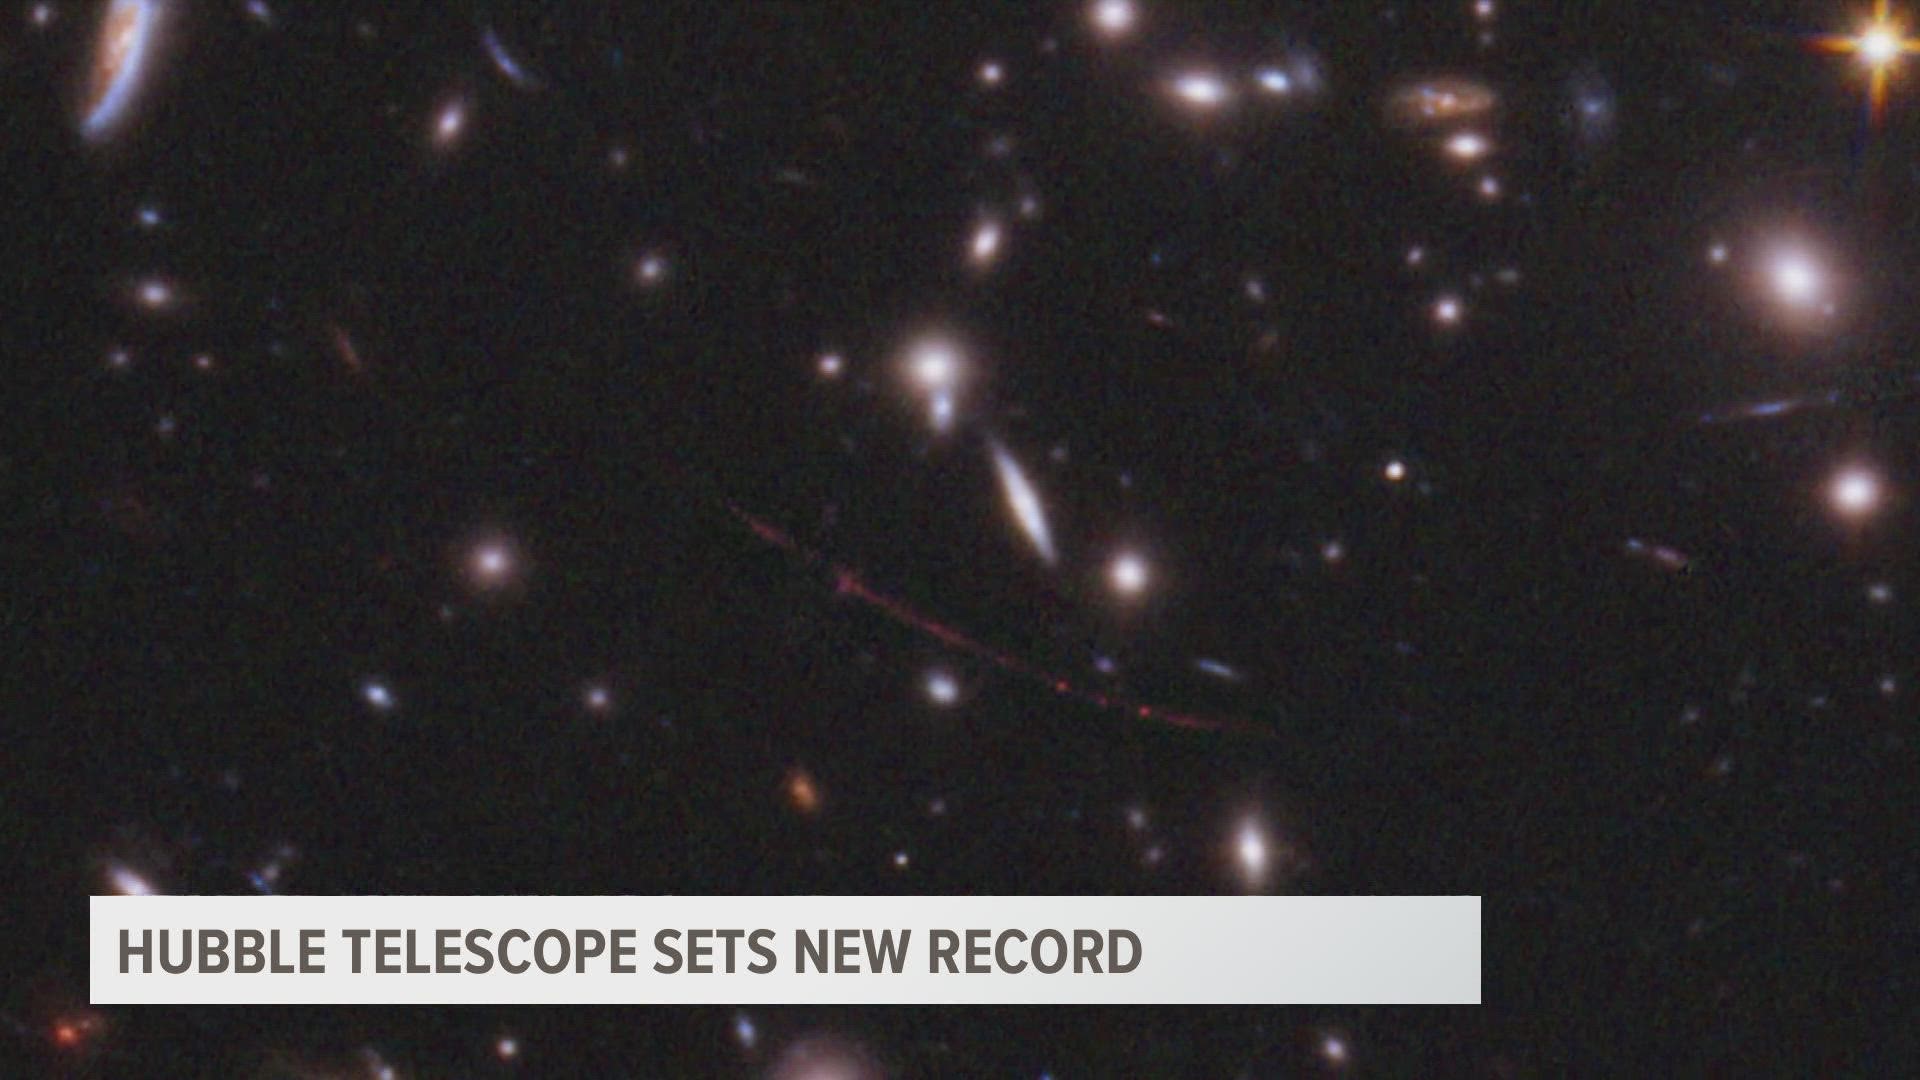 The Hubble Space Telescope has set a new record for the farthest single star observed by man. Meteorologist Michael Behrens explains the discovery!